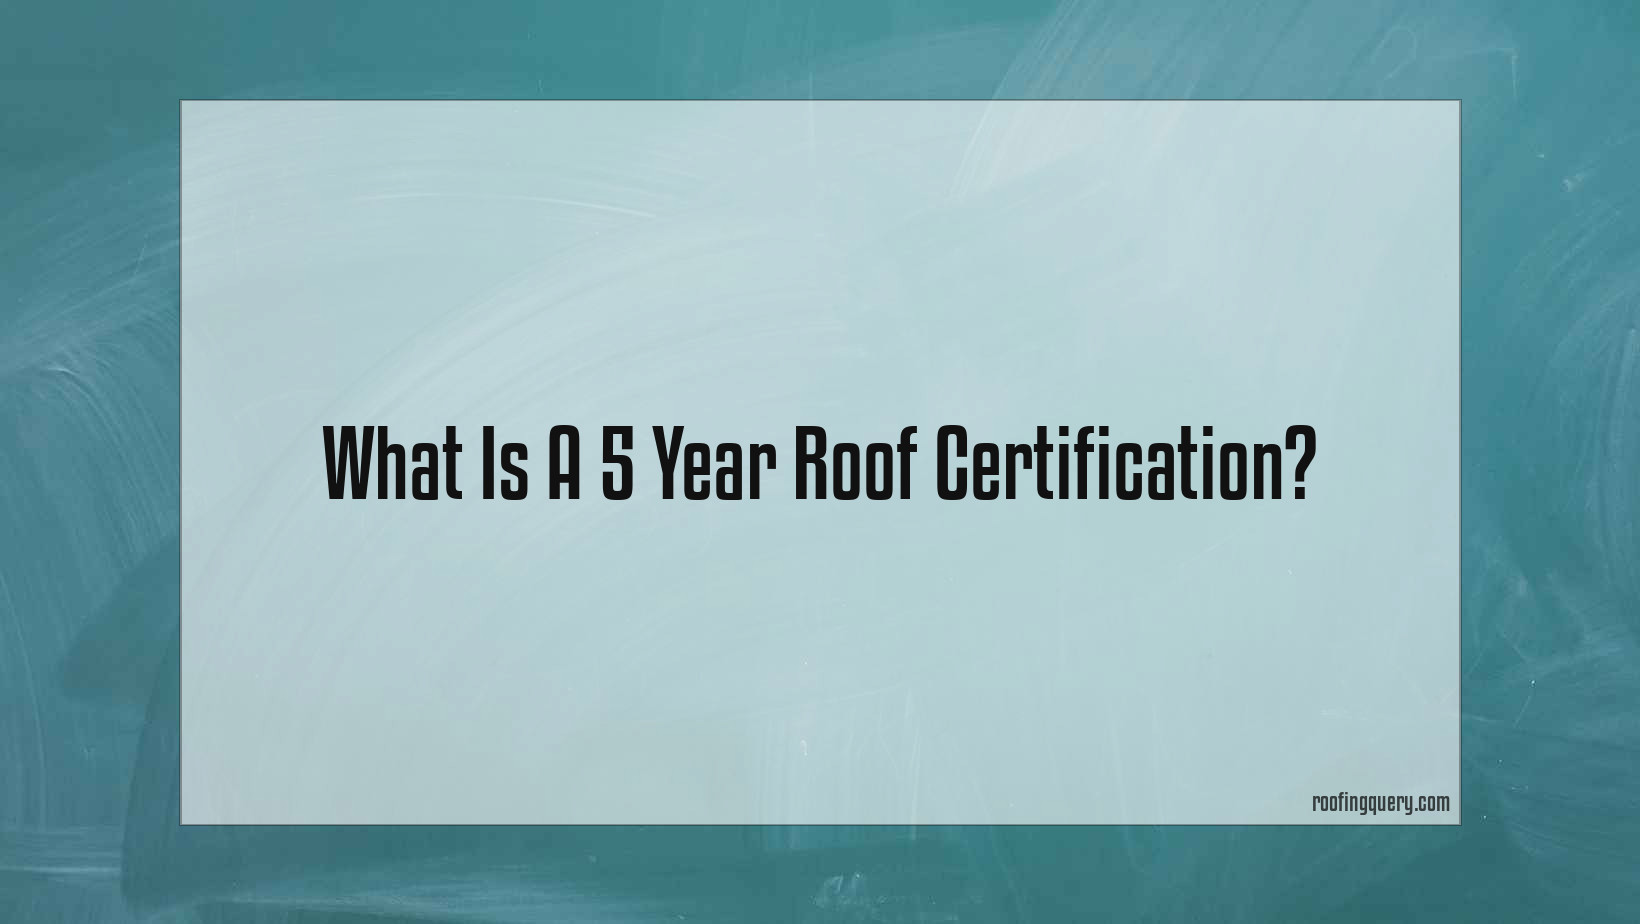 What Is A 5 Year Roof Certification